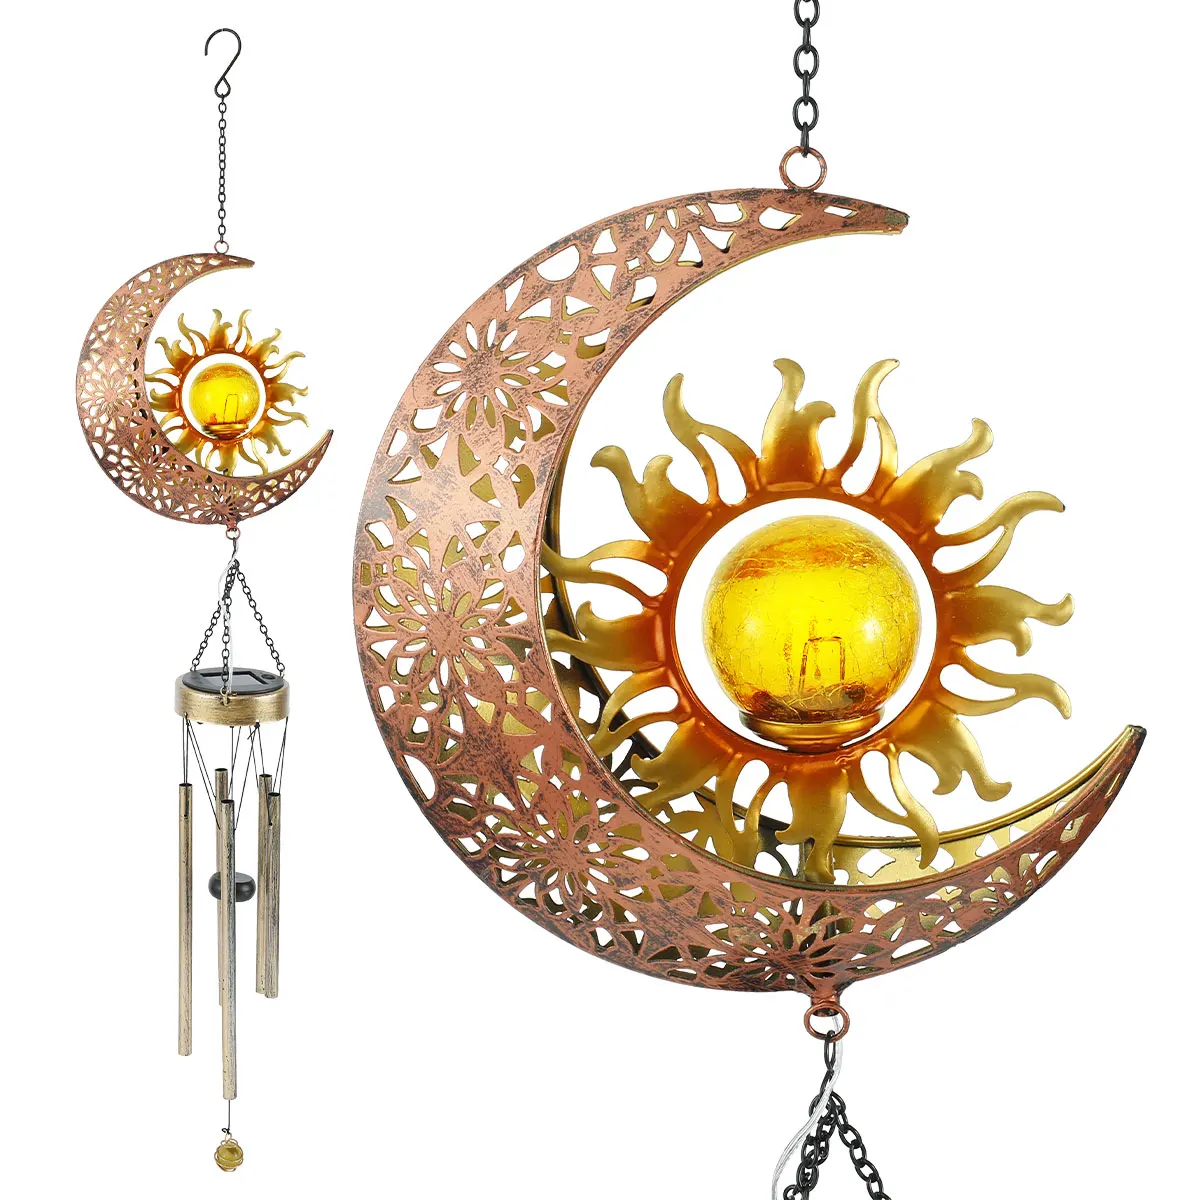 

Wind Chimes Solar Lights Outdoor Waterproof Hanging Aeolian bells Solar Lamp With Moon Star Sun Shape For Party Garden Festival